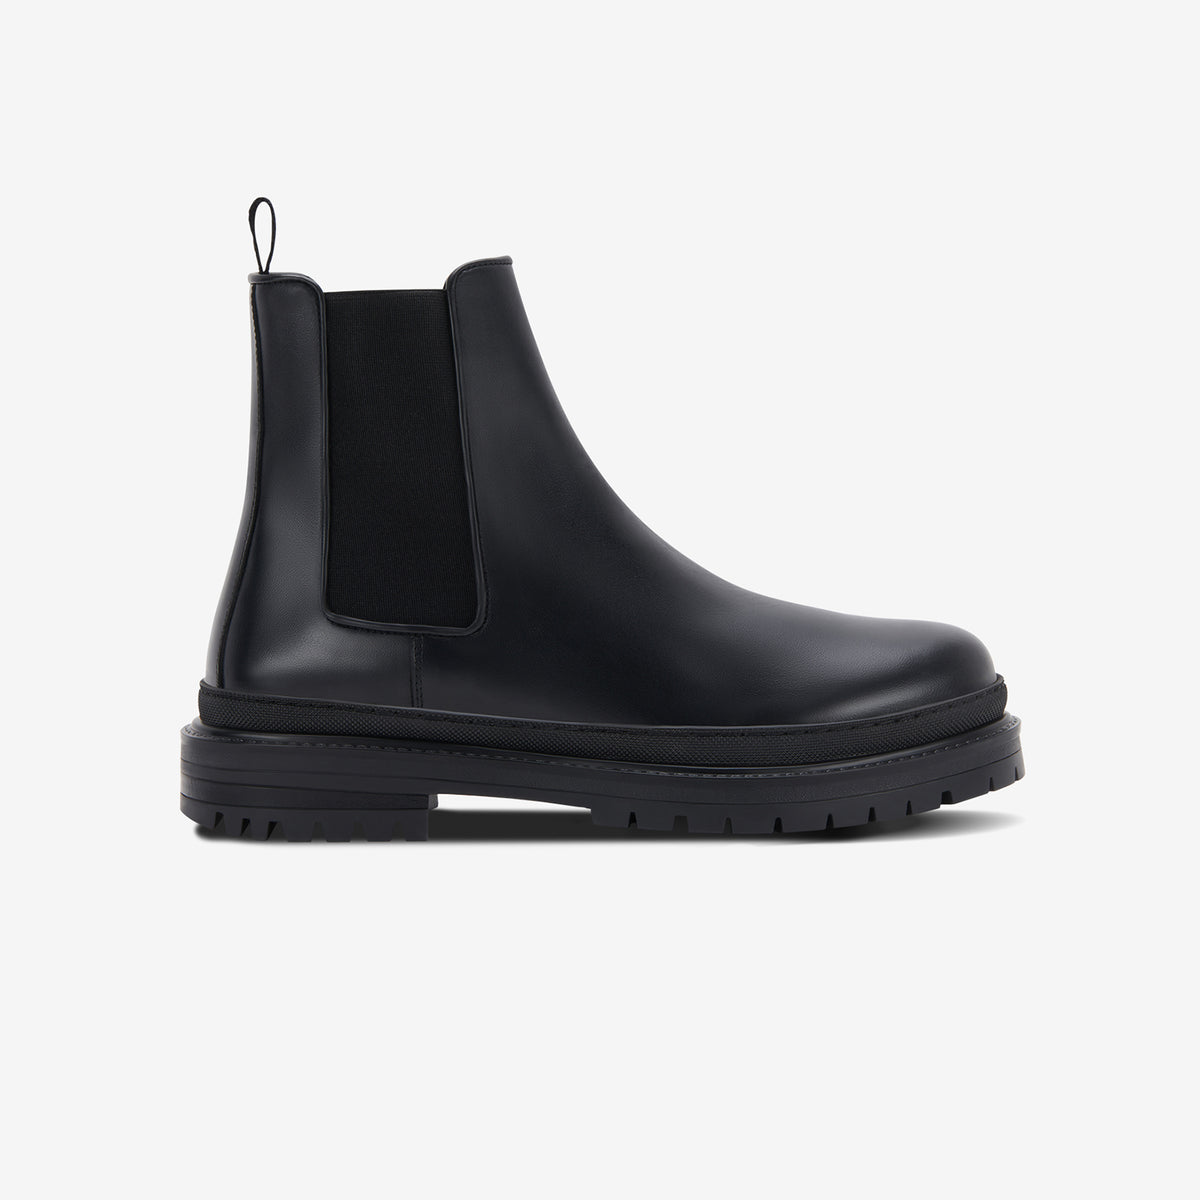 These Iconic Chelsea Boots Are Now 20% Off